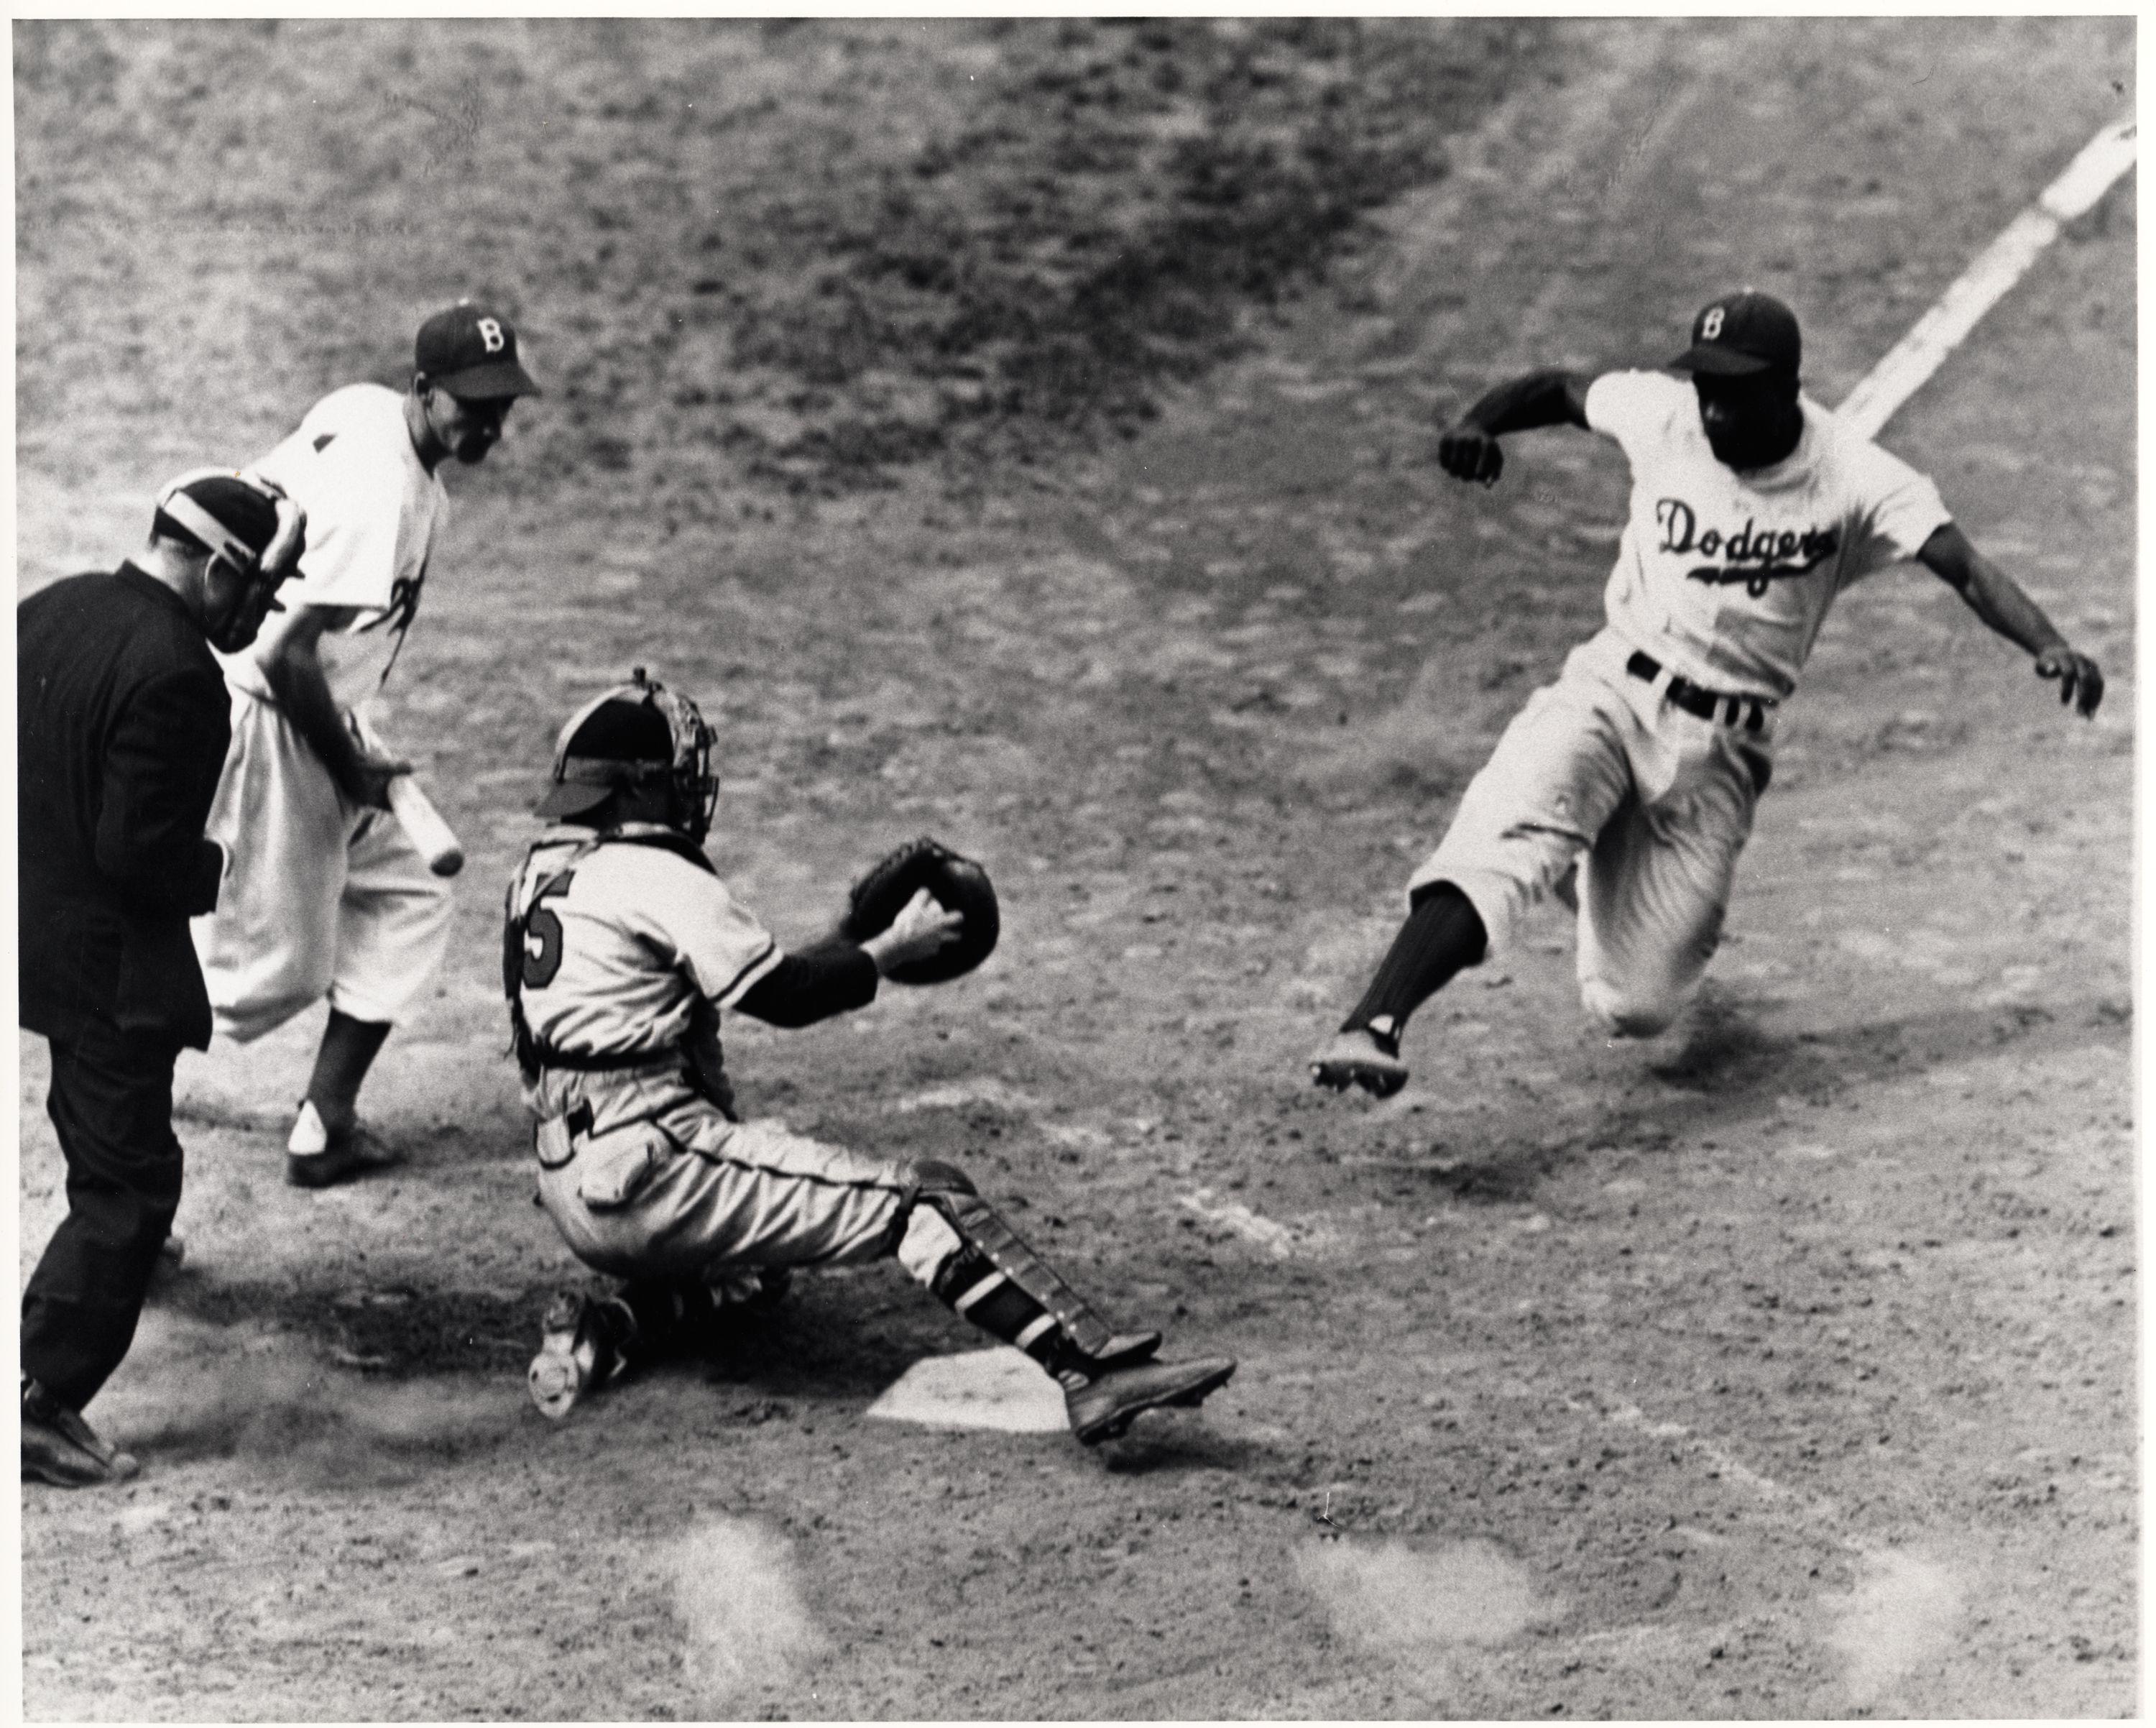 Jackie Robinson sliding into home against Yankees catcher